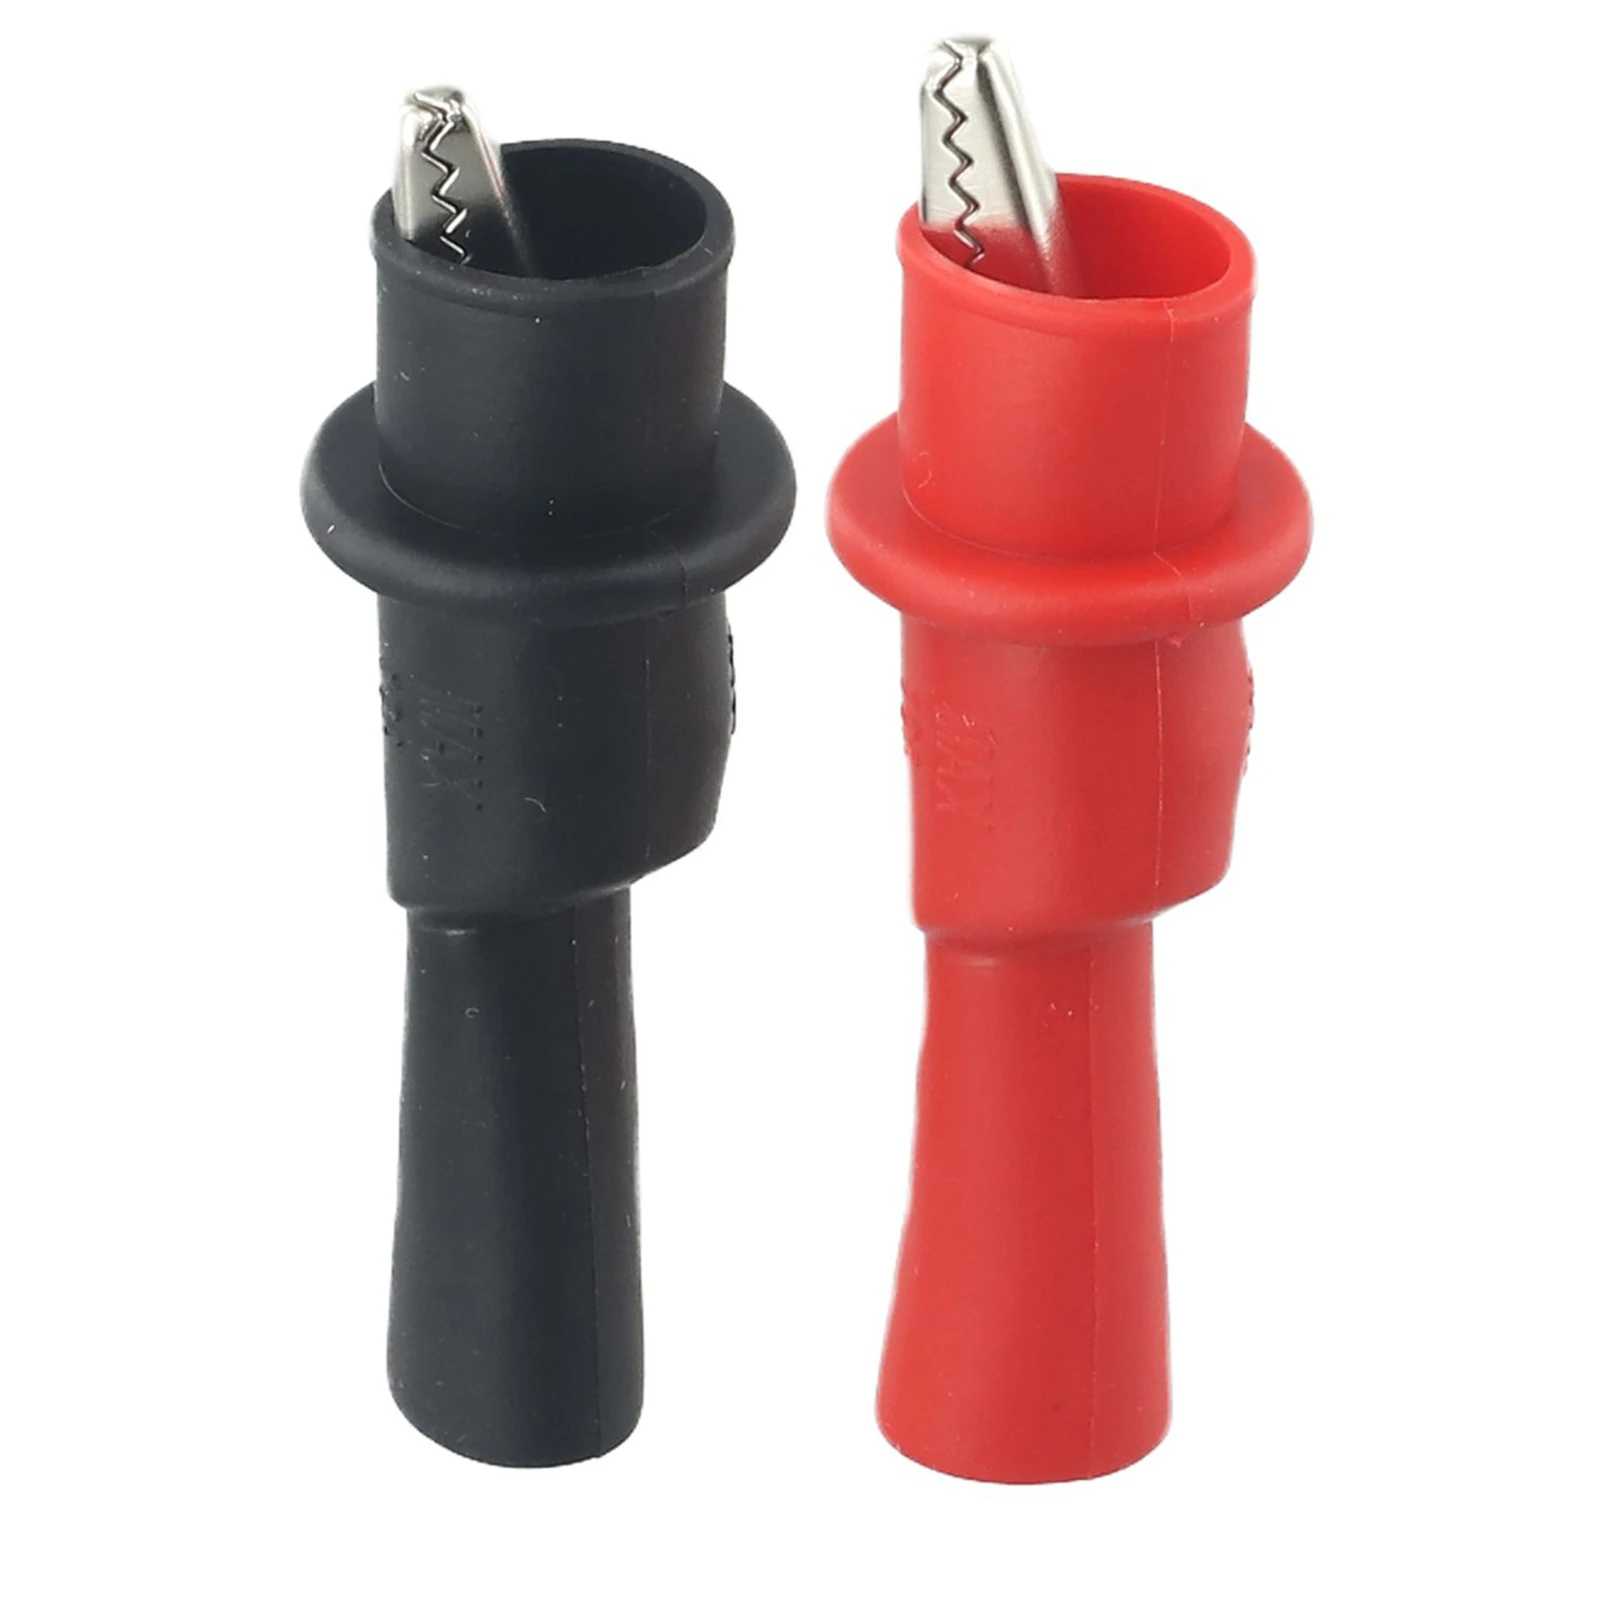 

Multimeter Push Alligator Clip Insulated Crocodile Clamp Rust Proof Corrosion Oxidation Electrical Test Supplies Connectors